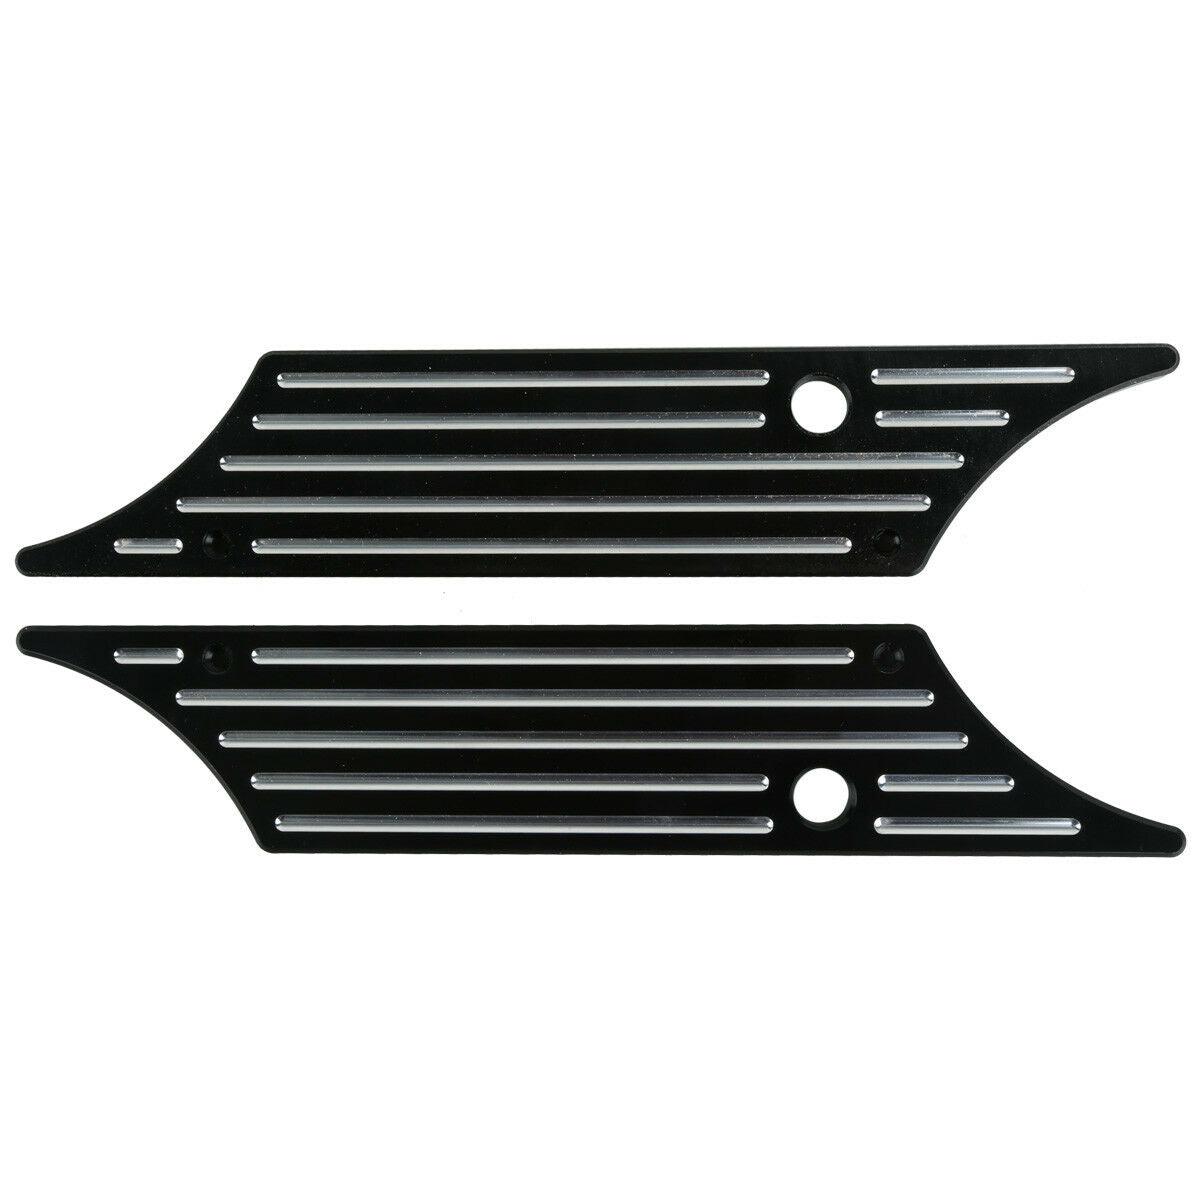 Black Saddlebag Latch Cover Face Fit For Harley Touring Road Electra Glide 93-13 - Moto Life Products